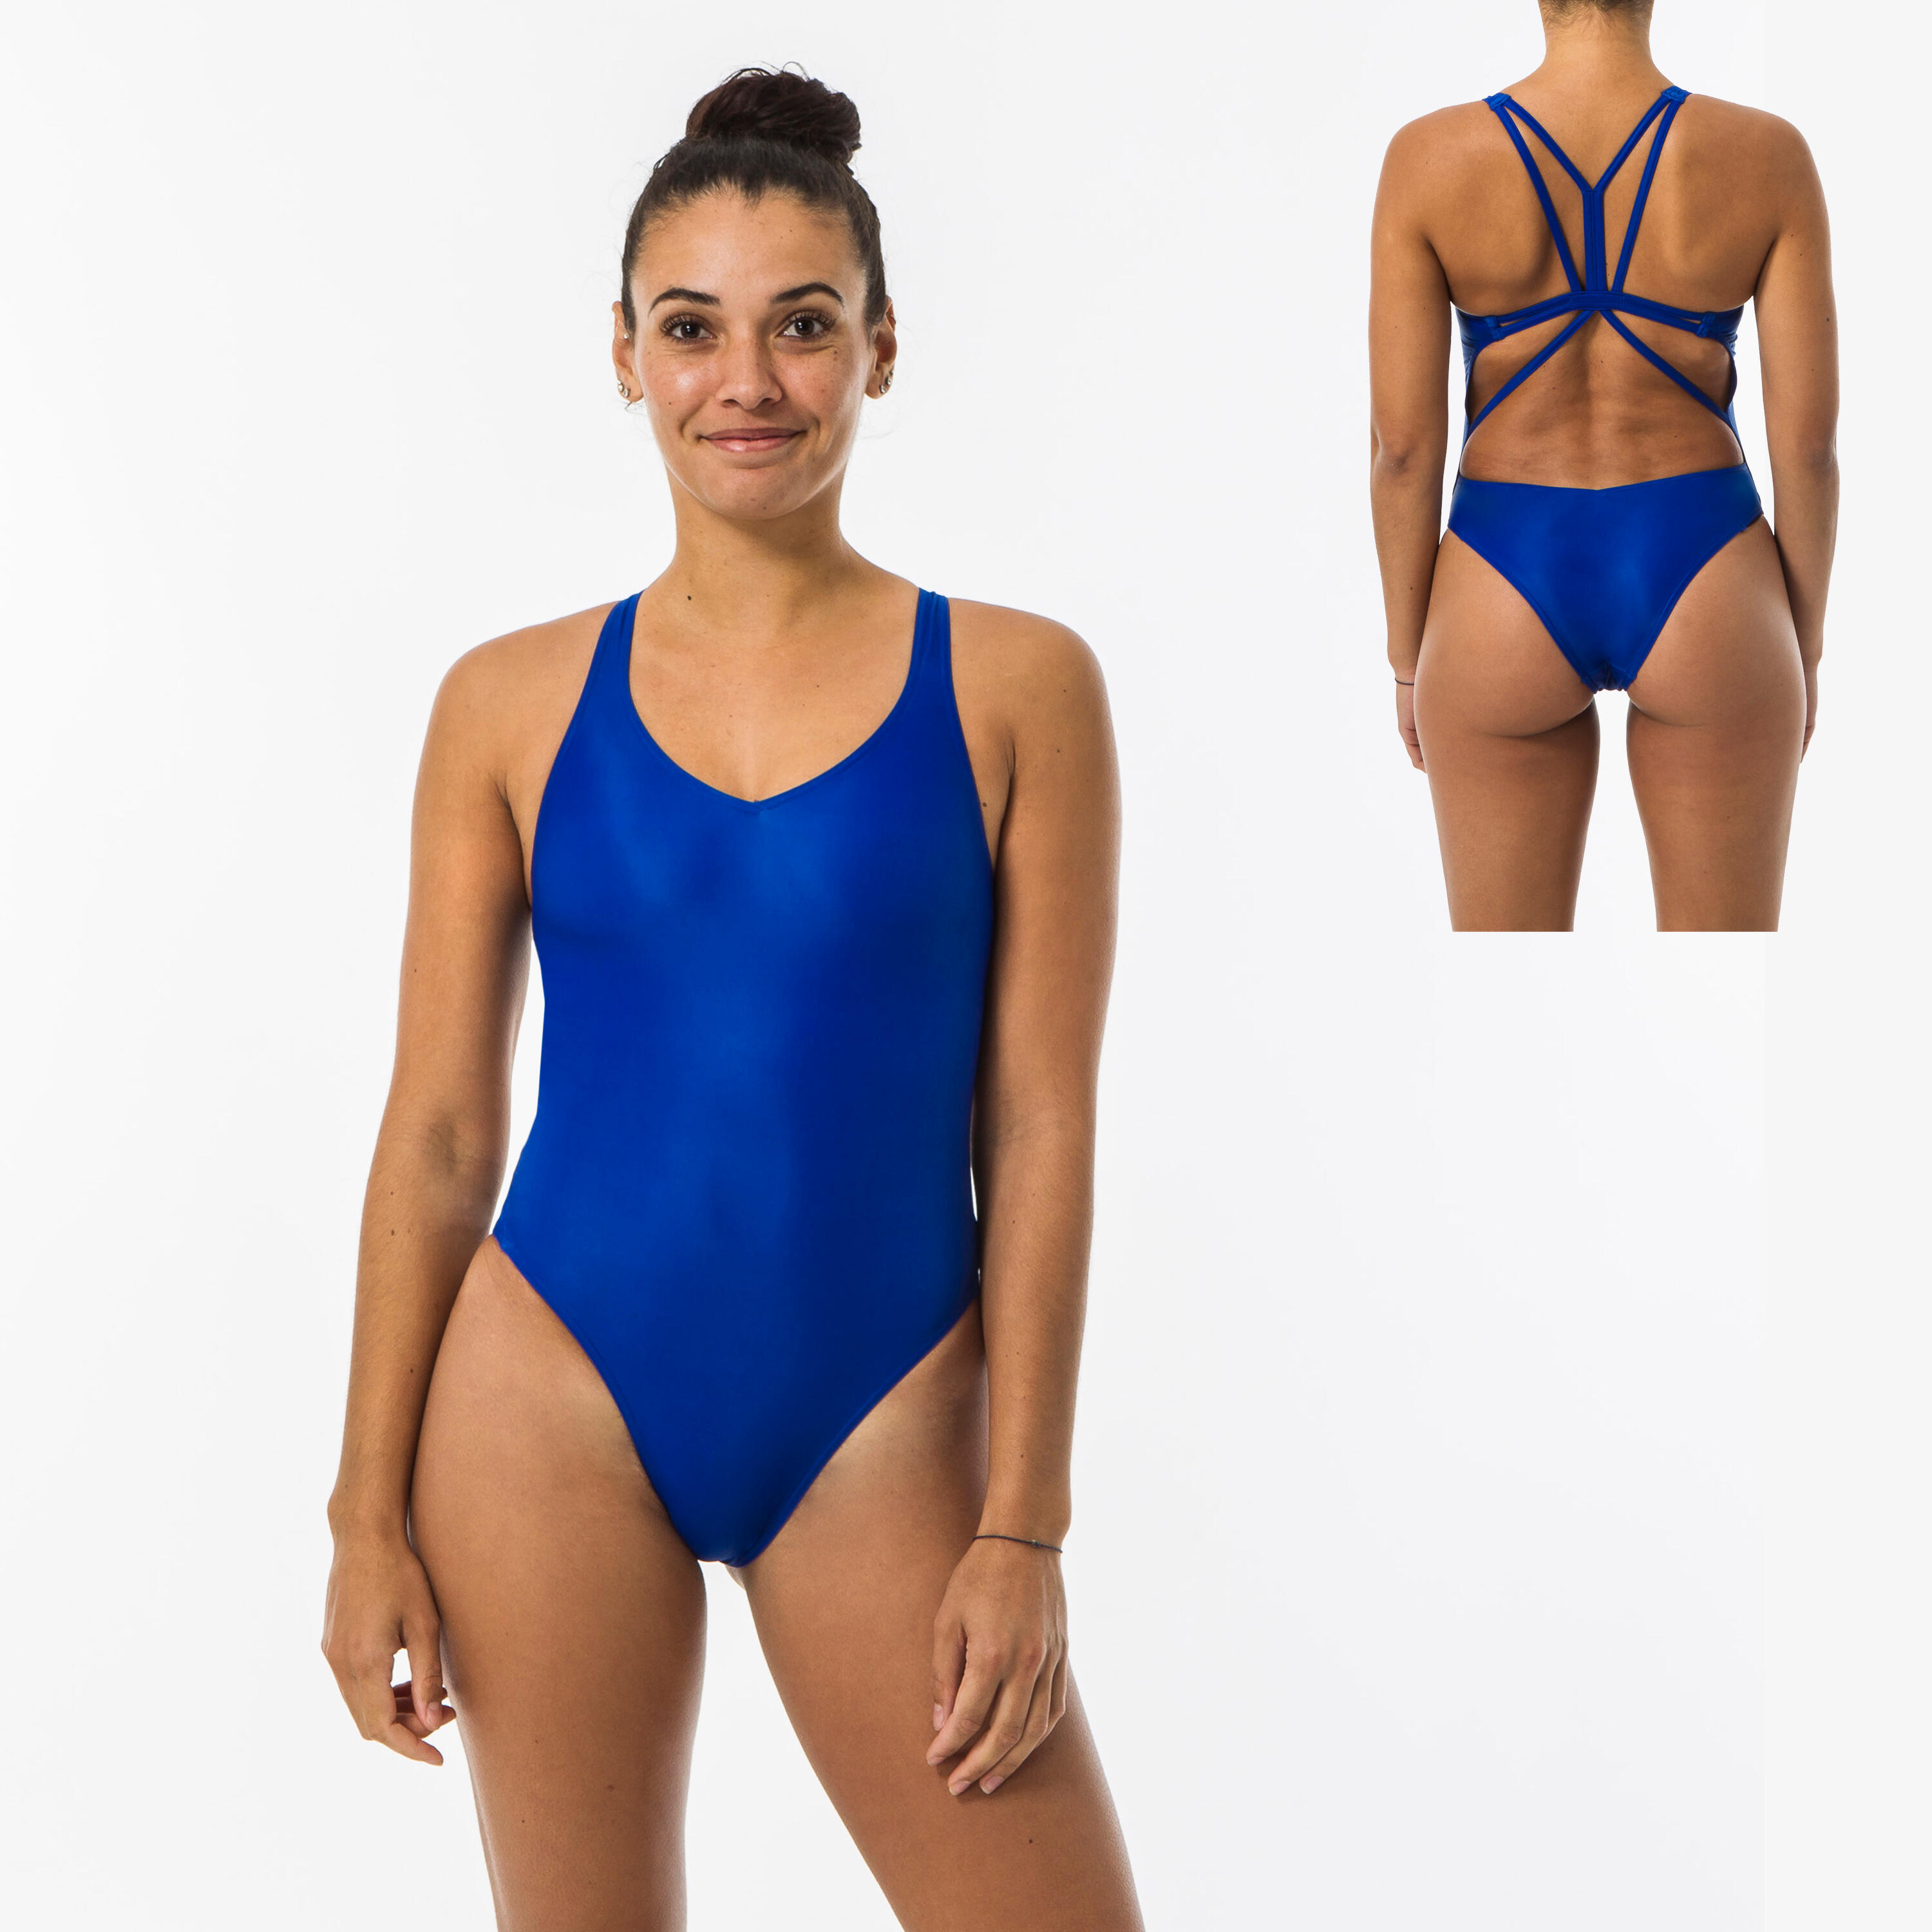 Women's Artistic Synchronised Swimming One-Piece Swimsuit - Blue. 6/9